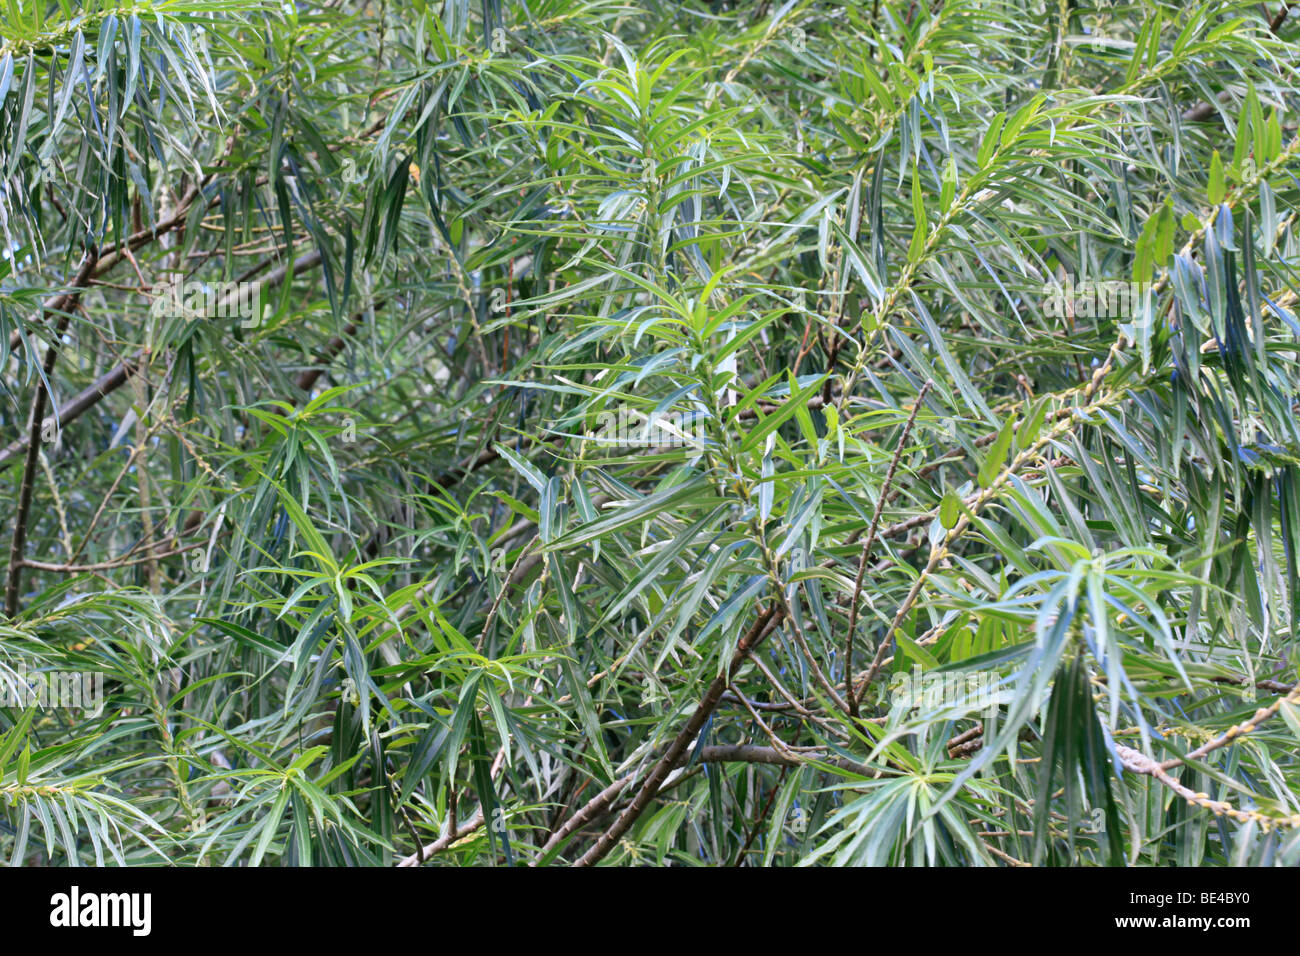 Japanese Fodder Willow grown in Canterbury, South Island,New Zealand Stock Photo